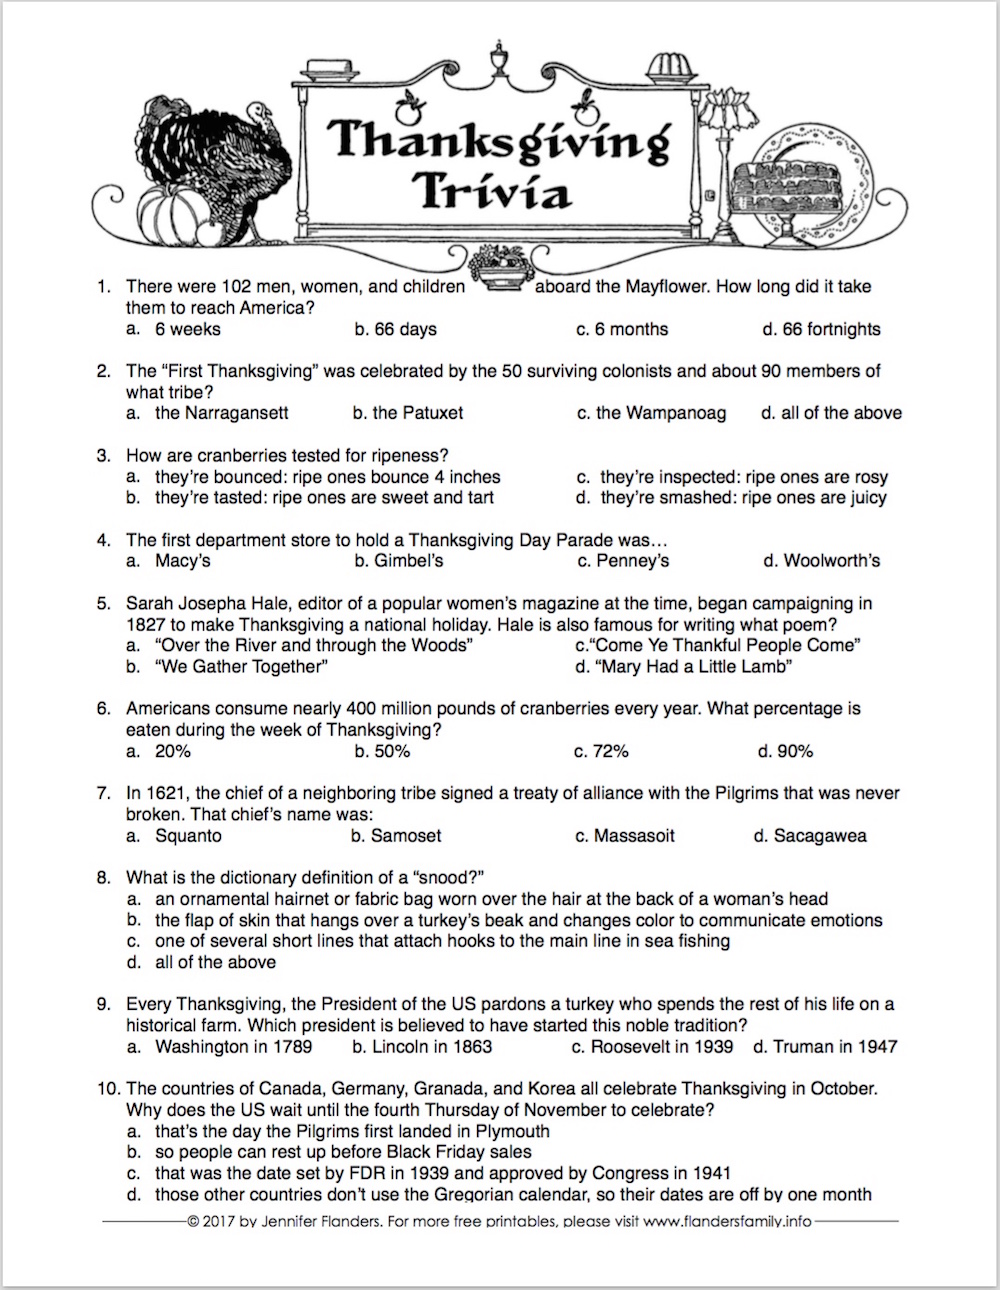 Thanksgiving Trivia Quiz Test Your Knowledge Flanders Family Homelife